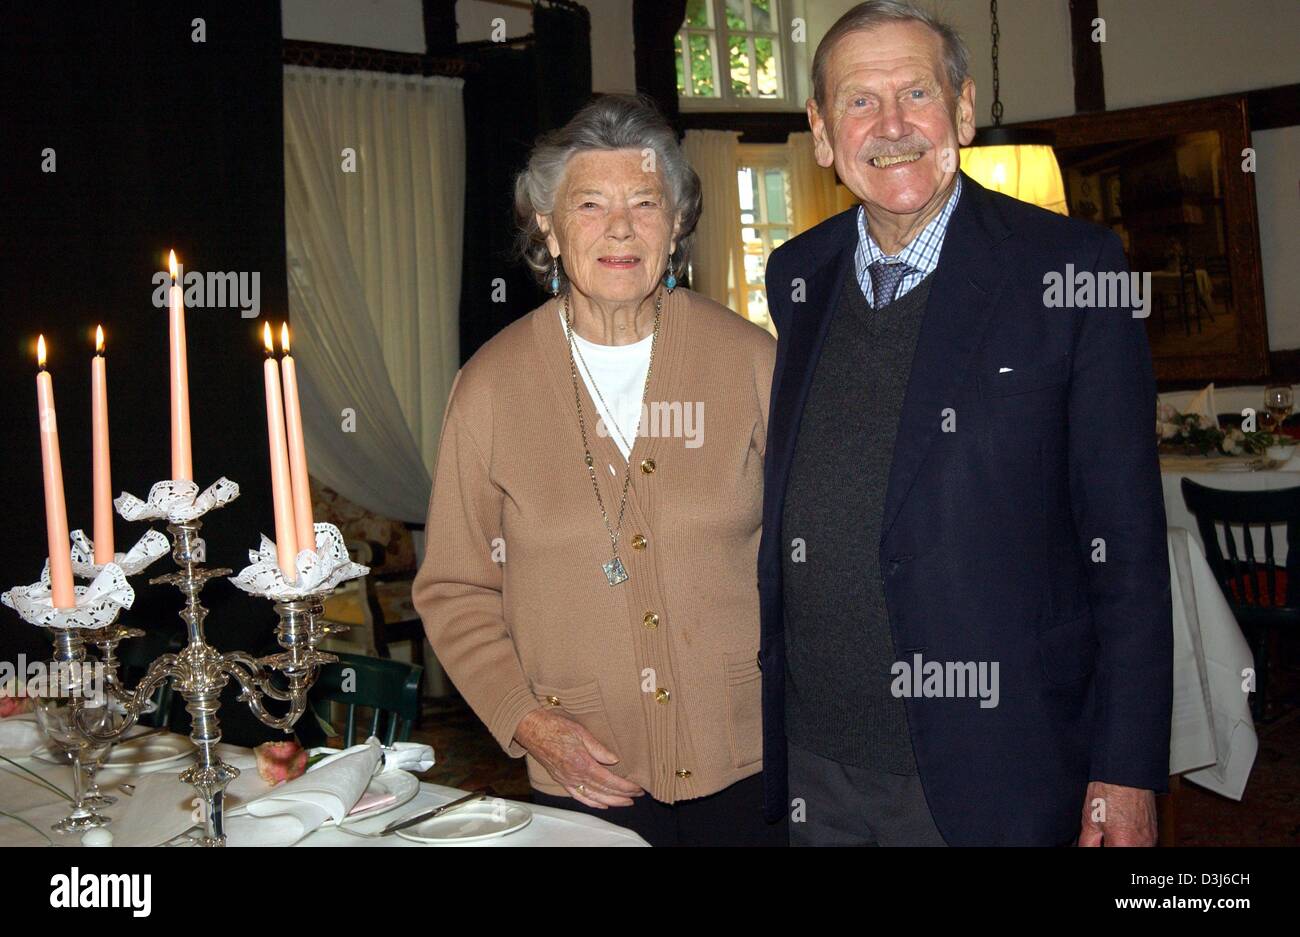 (dpa) - British bestselling author Rosamunde Pilcher and her husband Graham visit Hohenlimburg Castle in Hagen-Hohenlimburg, western Germany, 21 May 2004. Pilcher, who became world famous with works such as 'The Shell Seekers', 'Winter Solstice' and 'September' is currently in Germany on the occasion of the opening of a culture and garden festival and to pay a visit to her niece wh Stock Photo